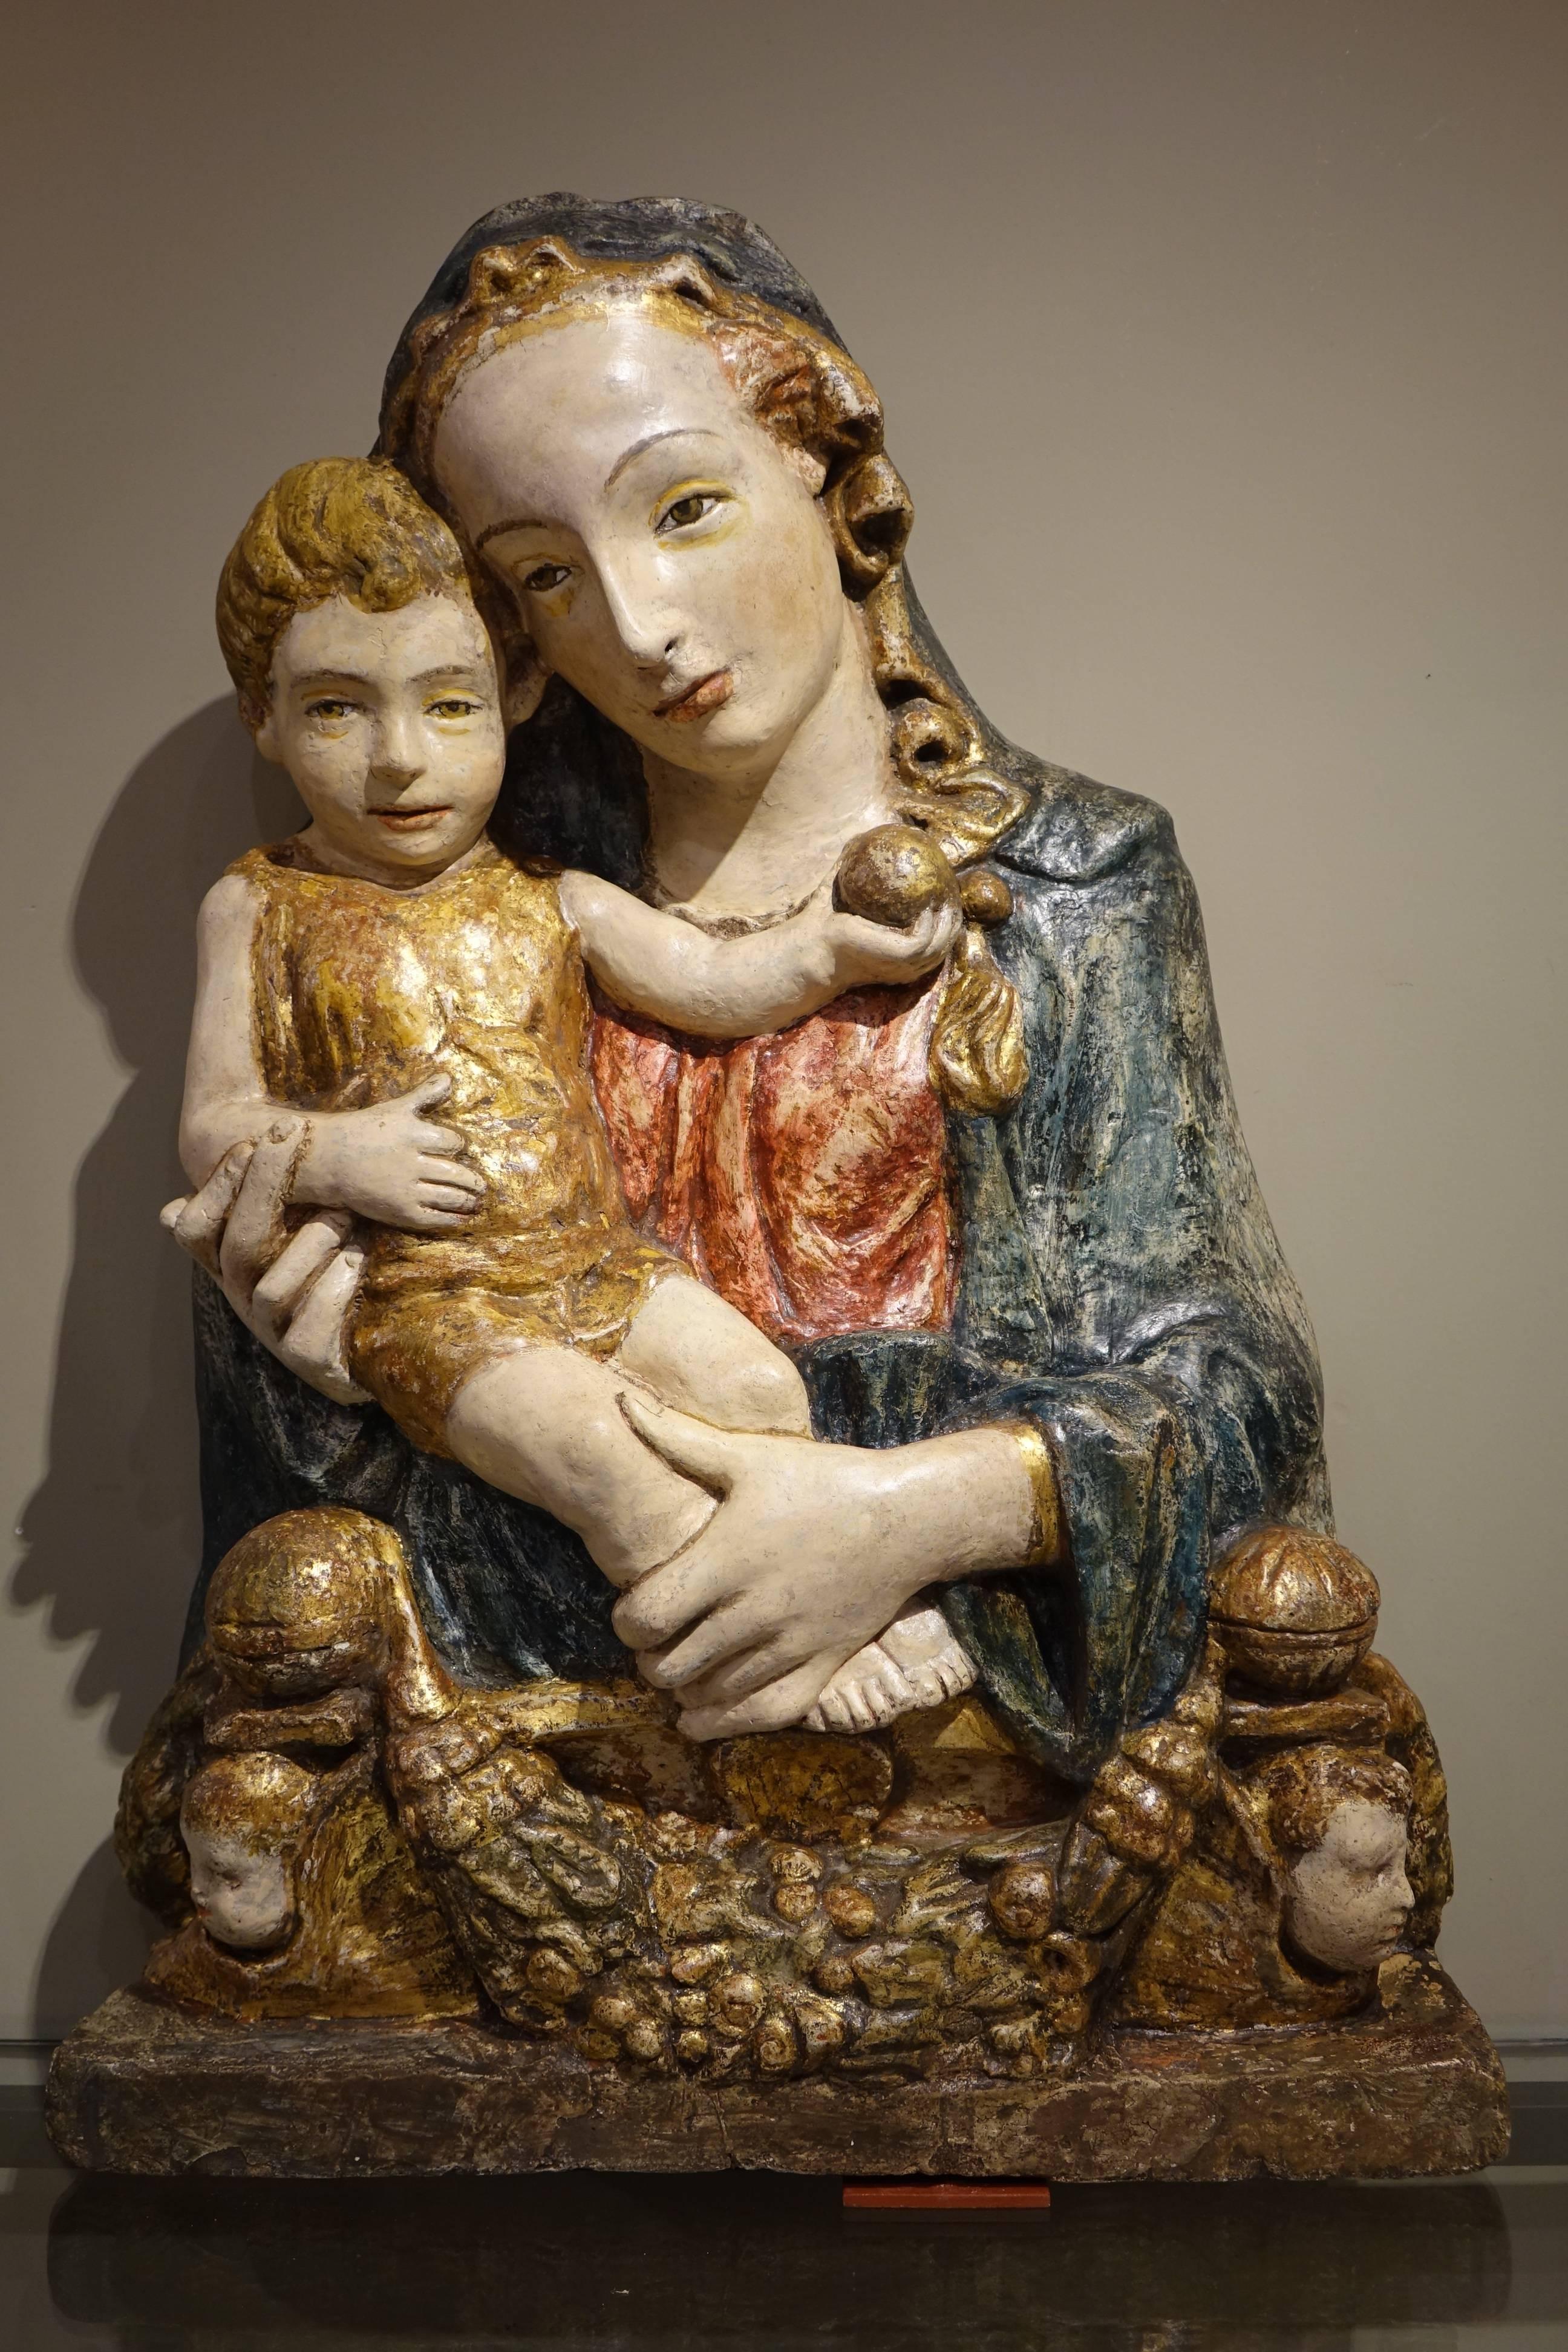 Large and beautiful, rare sculpture of  Virgin and Child, in relief, executed in painted and gilt stucco, resting on a base framed by two winged angels surrounding a garland of flowers.
The stucco technique, made of  gypsum, dates back to antiquity,